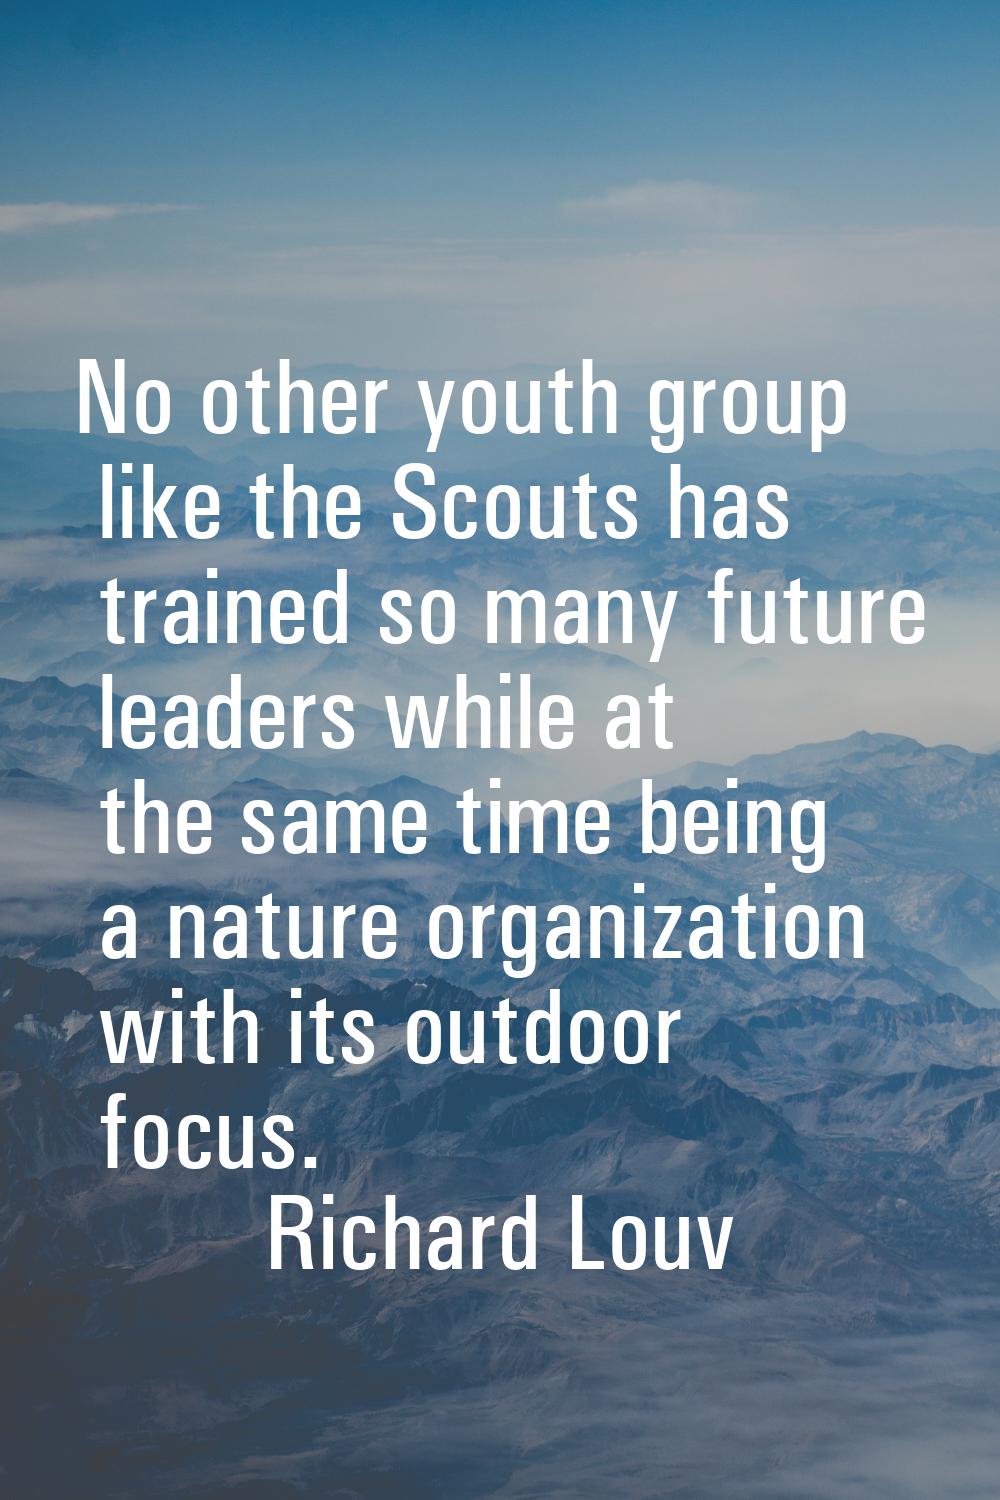 No other youth group like the Scouts has trained so many future leaders while at the same time bein